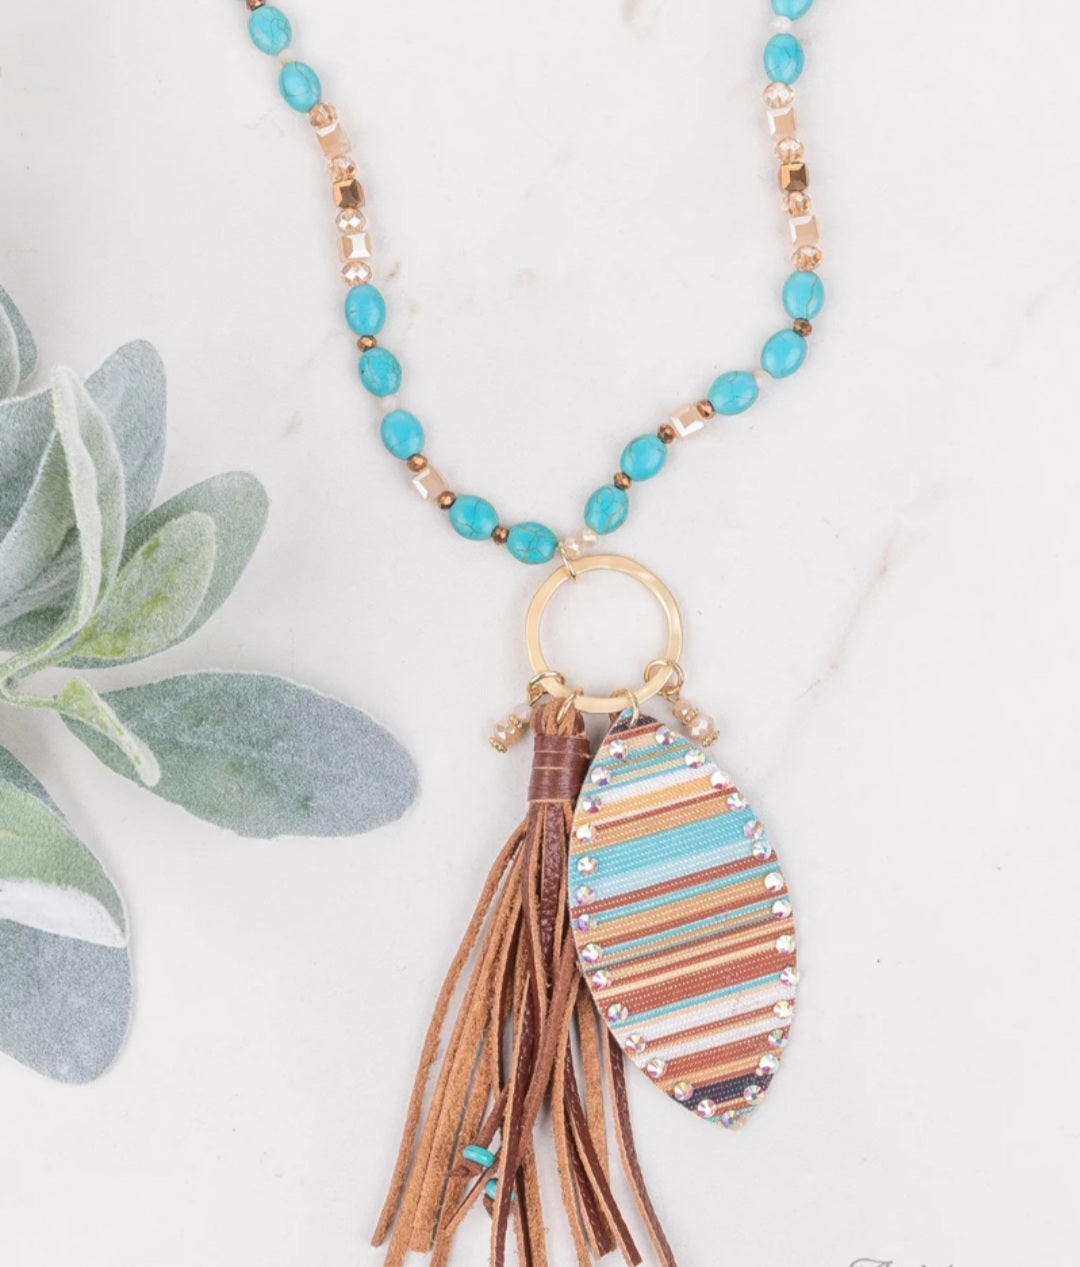 Westward boumd beaded necklace with serape pendant and leather tassel